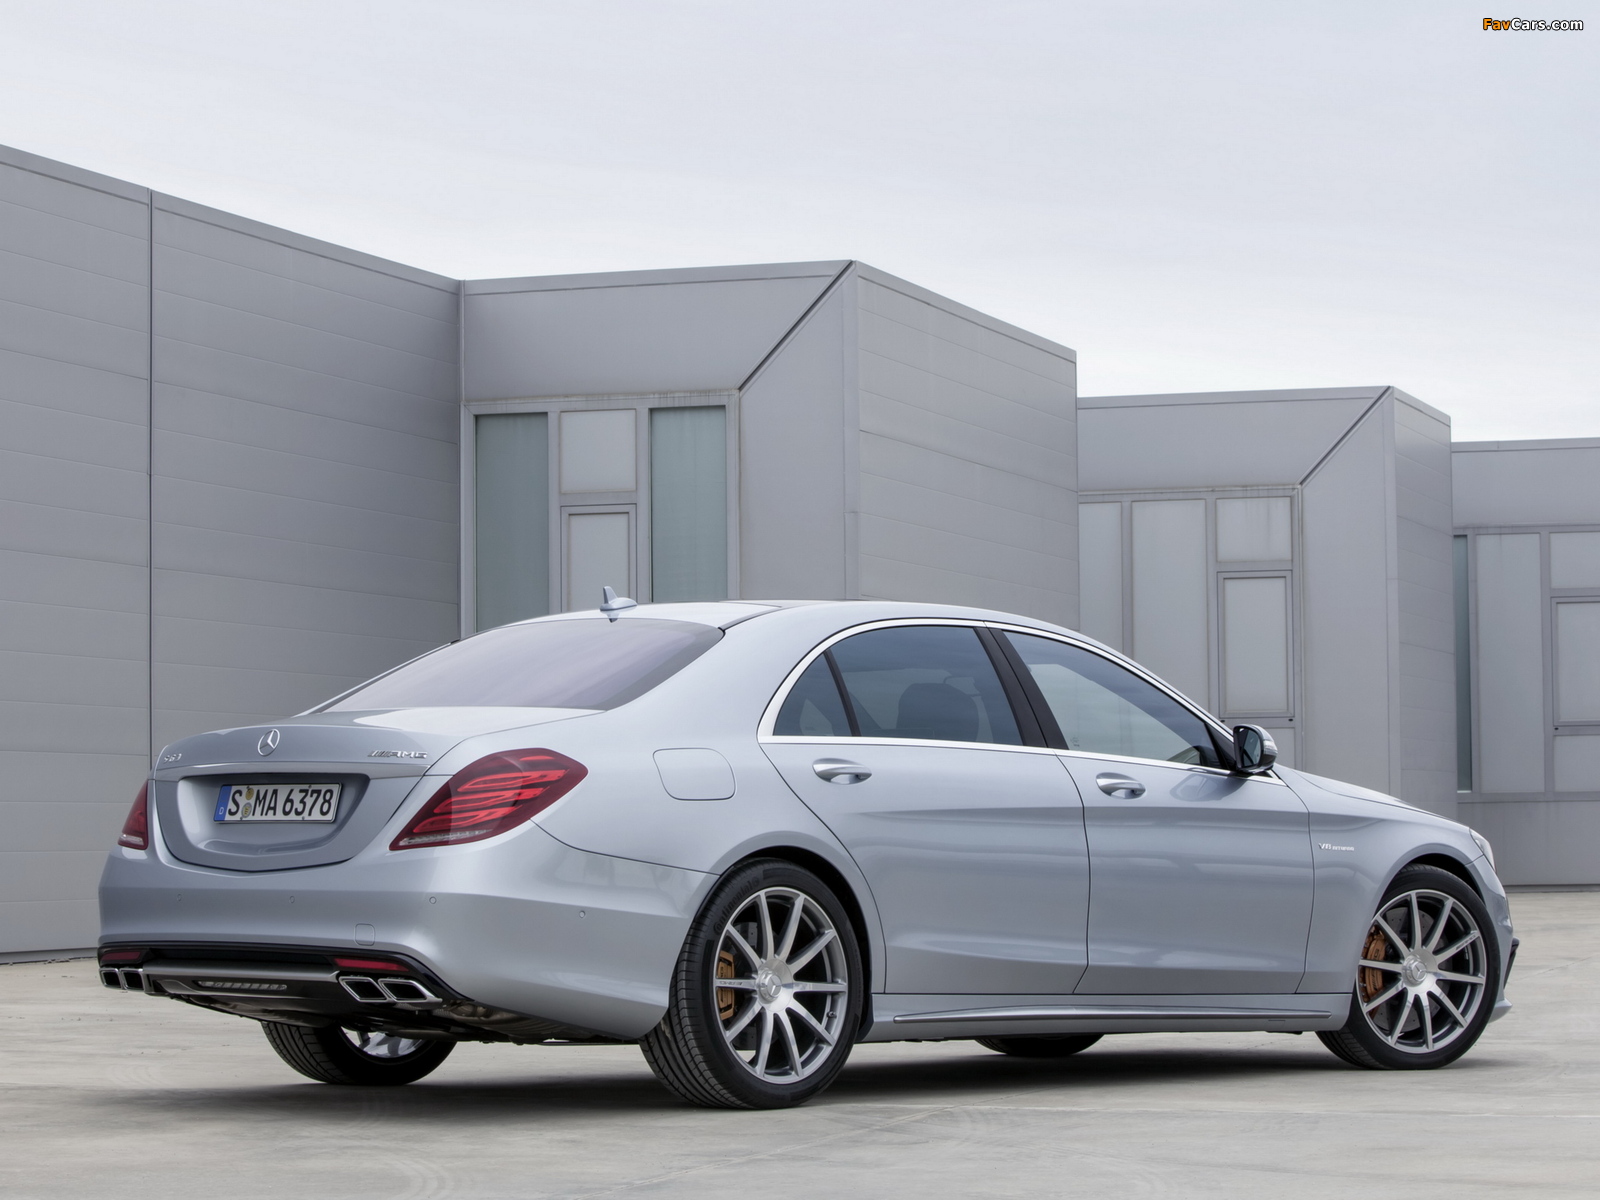 Mercedes-Benz S 63 AMG (W222) 2013 images (1600 x 1200)